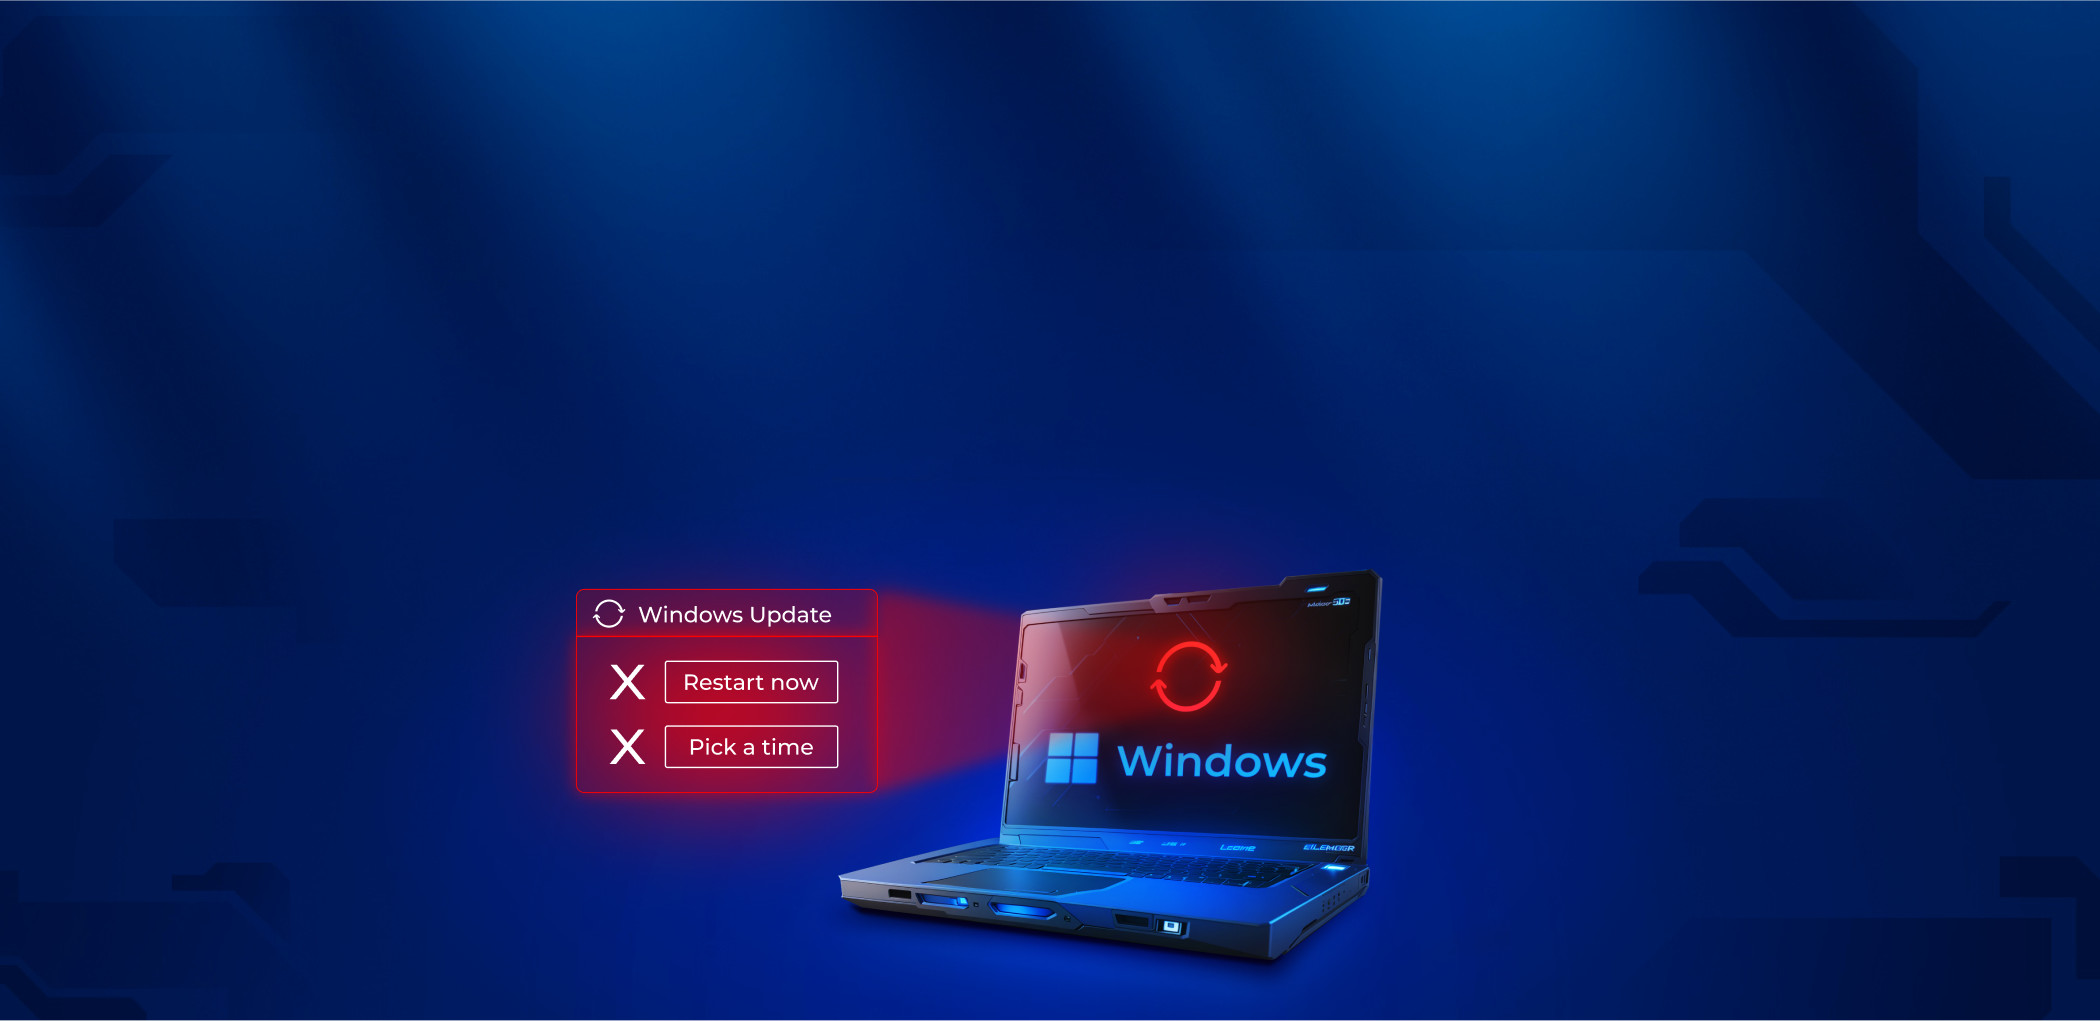 The Complete Guide to Fake Windows Updates